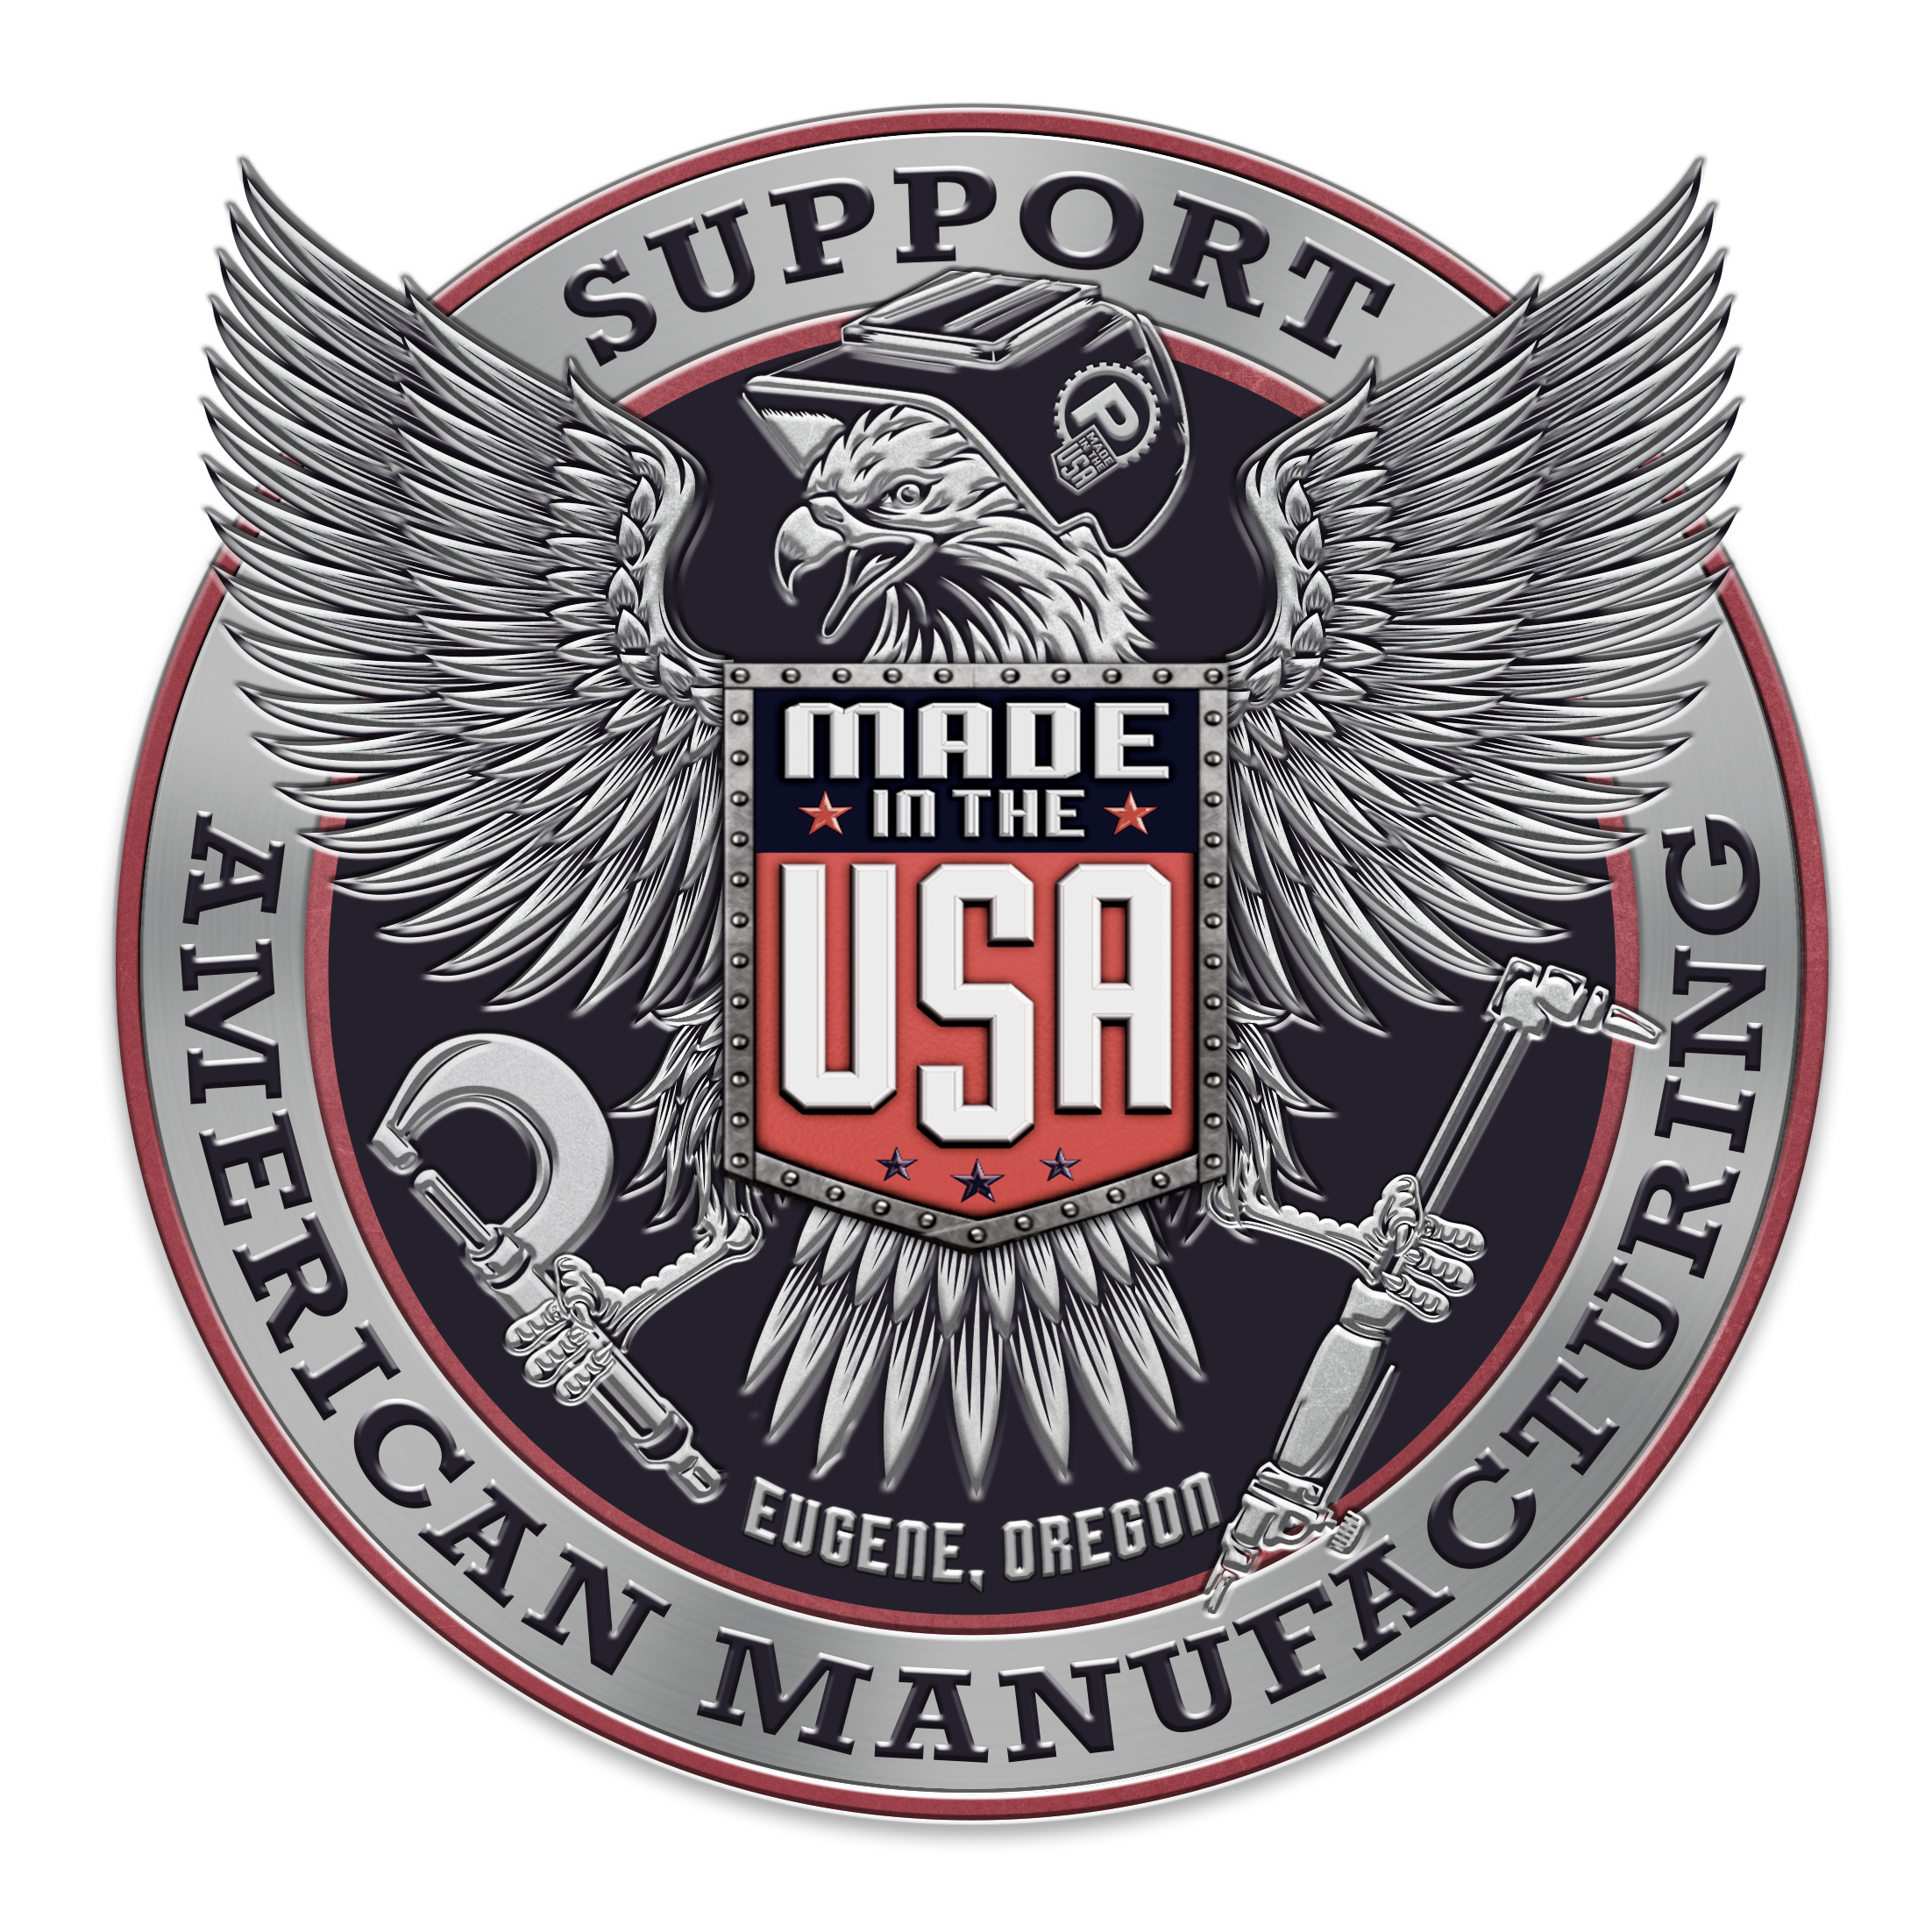 American Made, Made in the USA